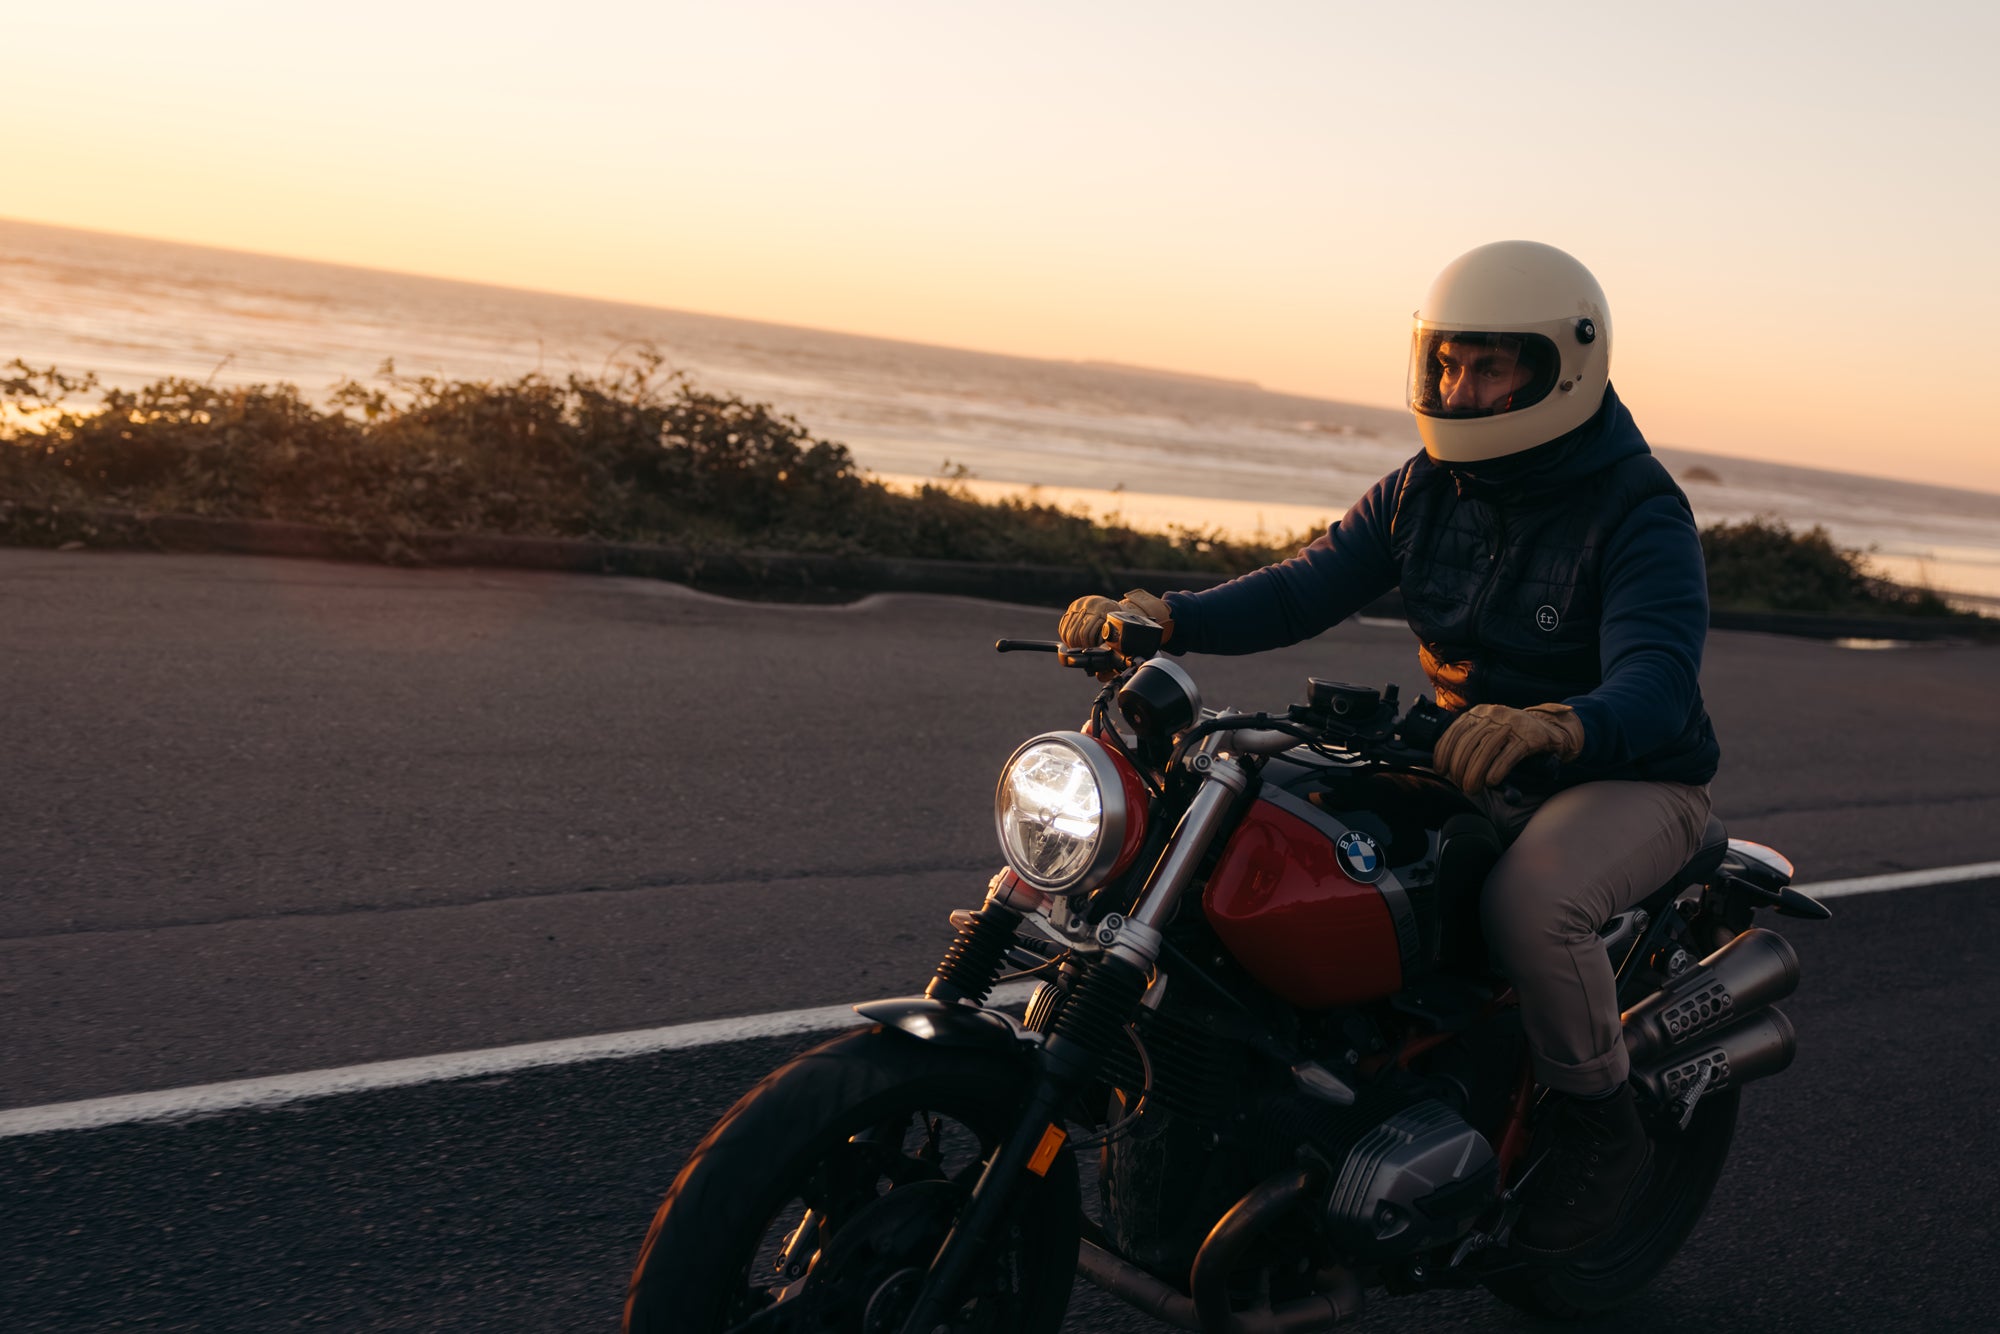 Man riding BMW Motobike on a road alongside ocean at sunset wearing Foreign Rider Insulated Vest